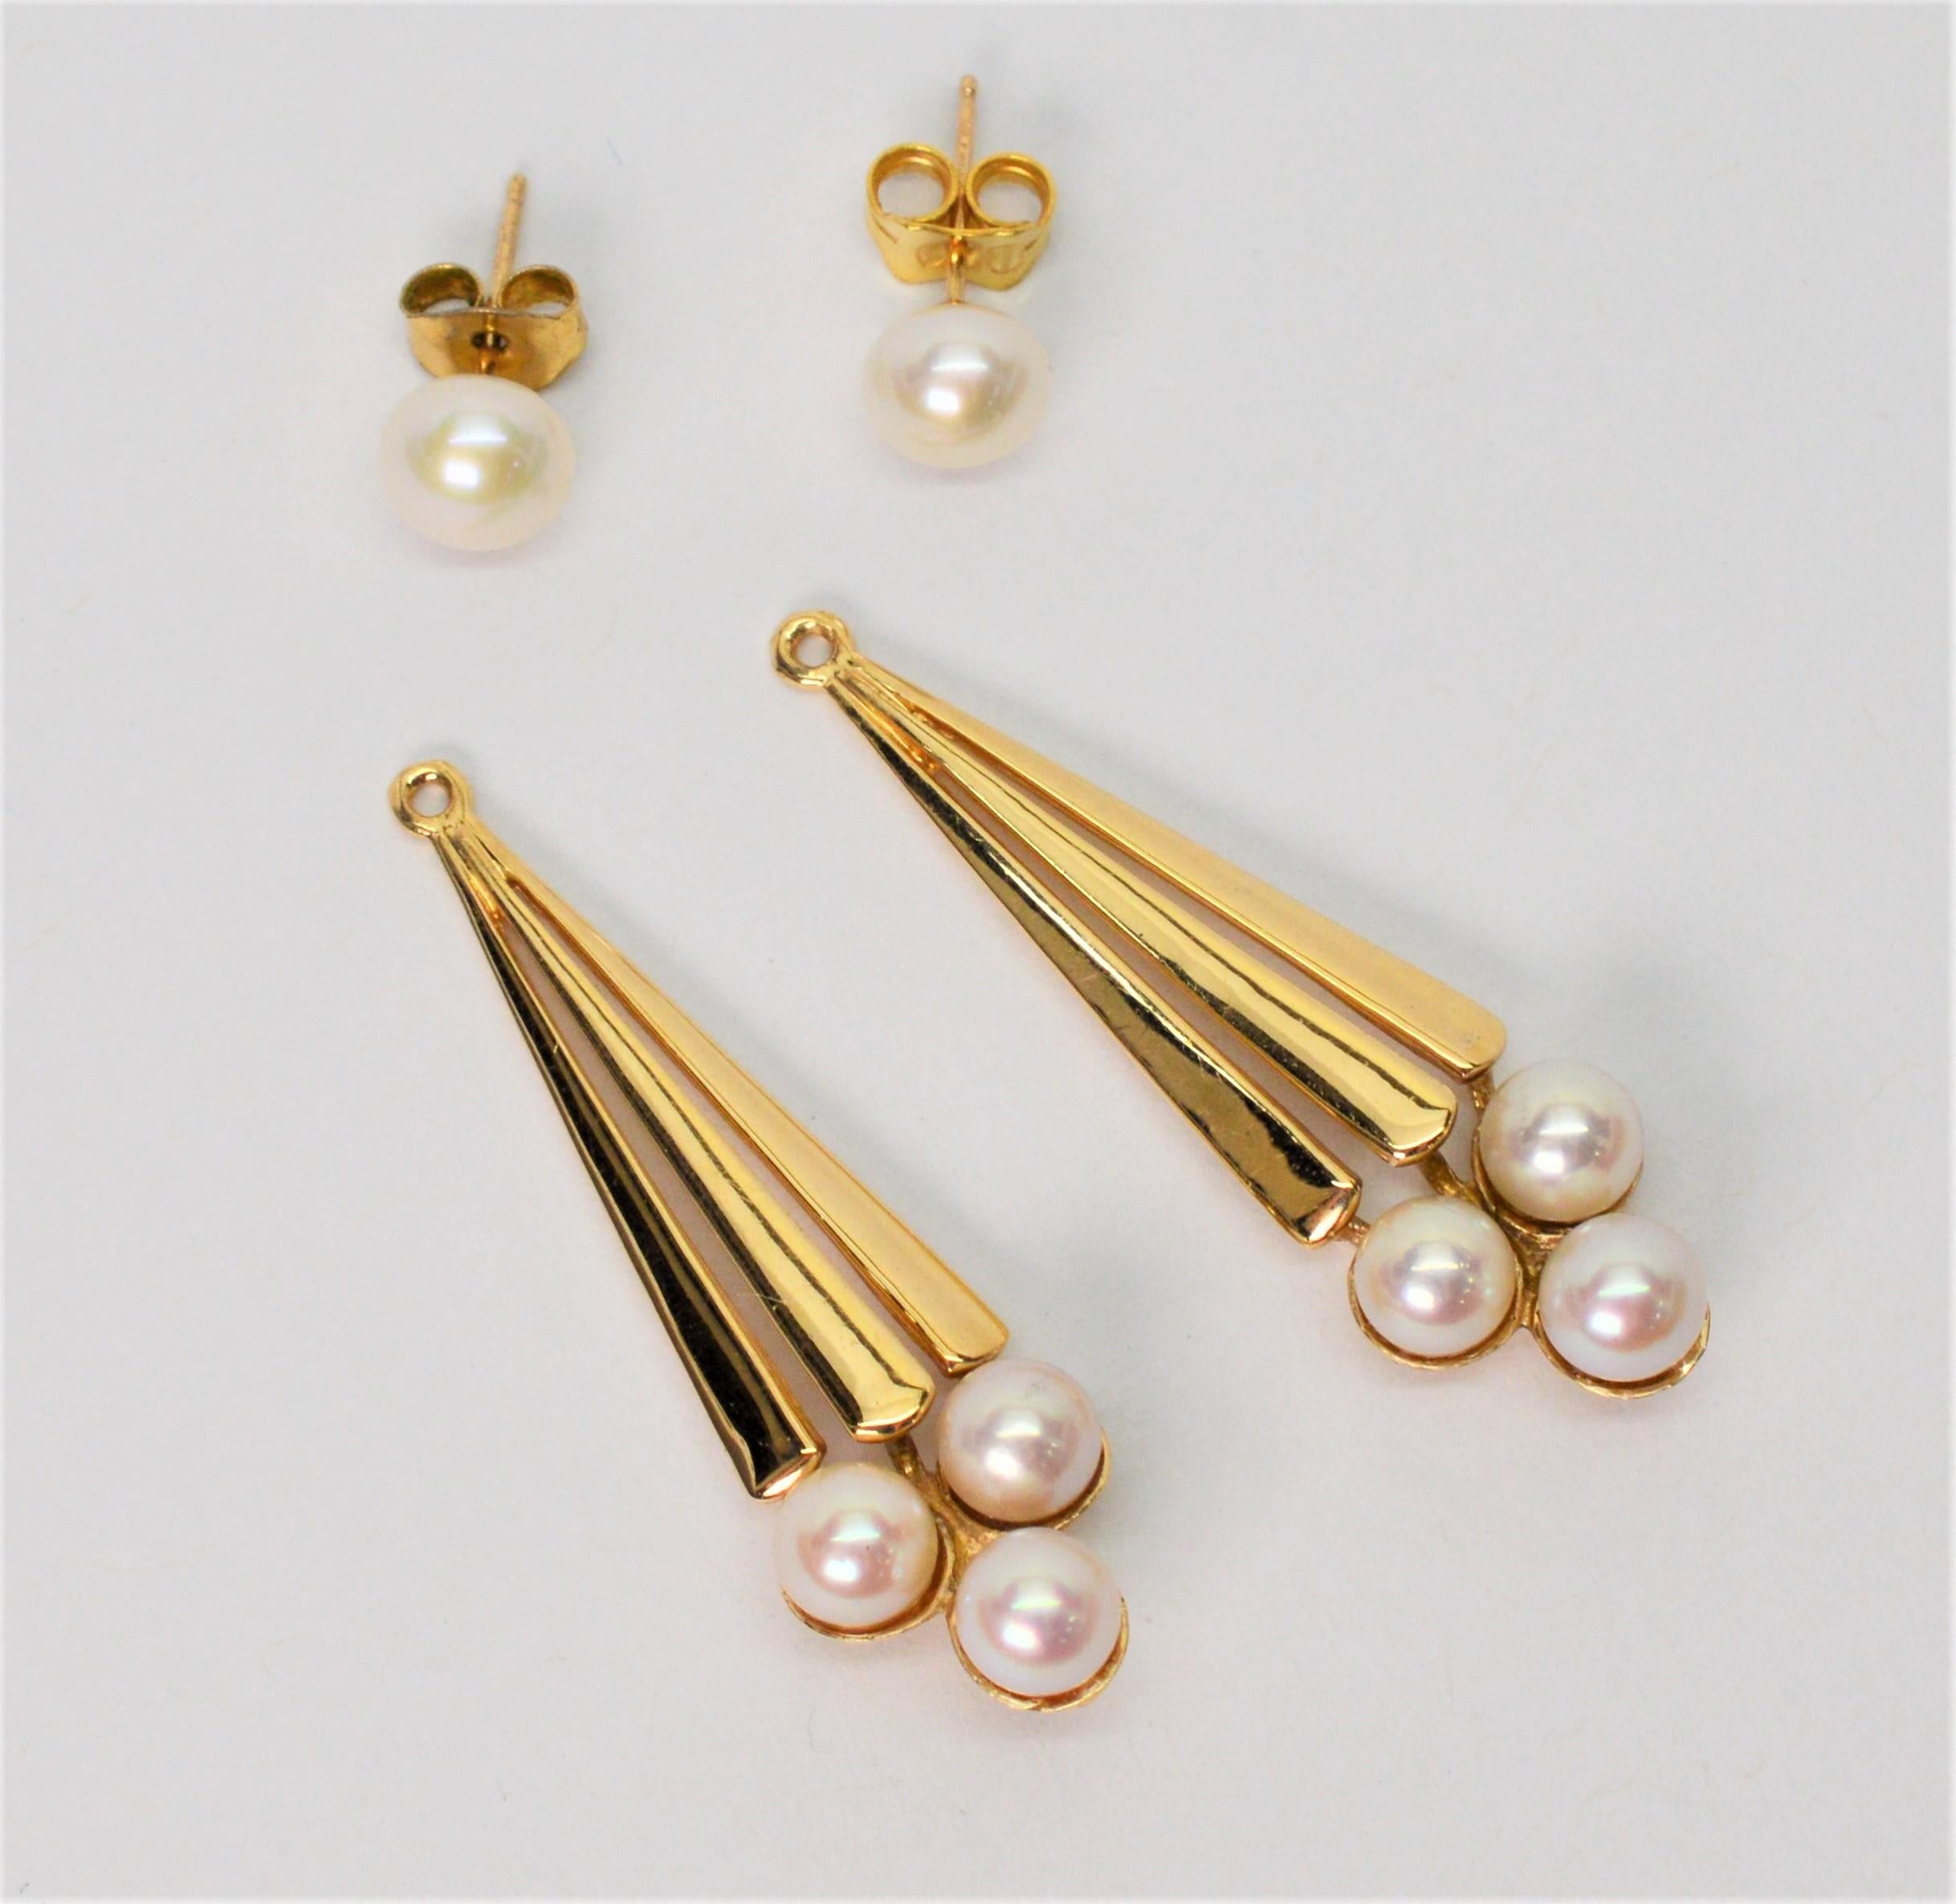 Get the most out of this terrific pair of versatile earrings. Create three looks starting with classic pearl studs (6.35mm) for daytime wear and have the option to covert to a more dramatic drop style by applying the chic fourteen karat 14k yellow